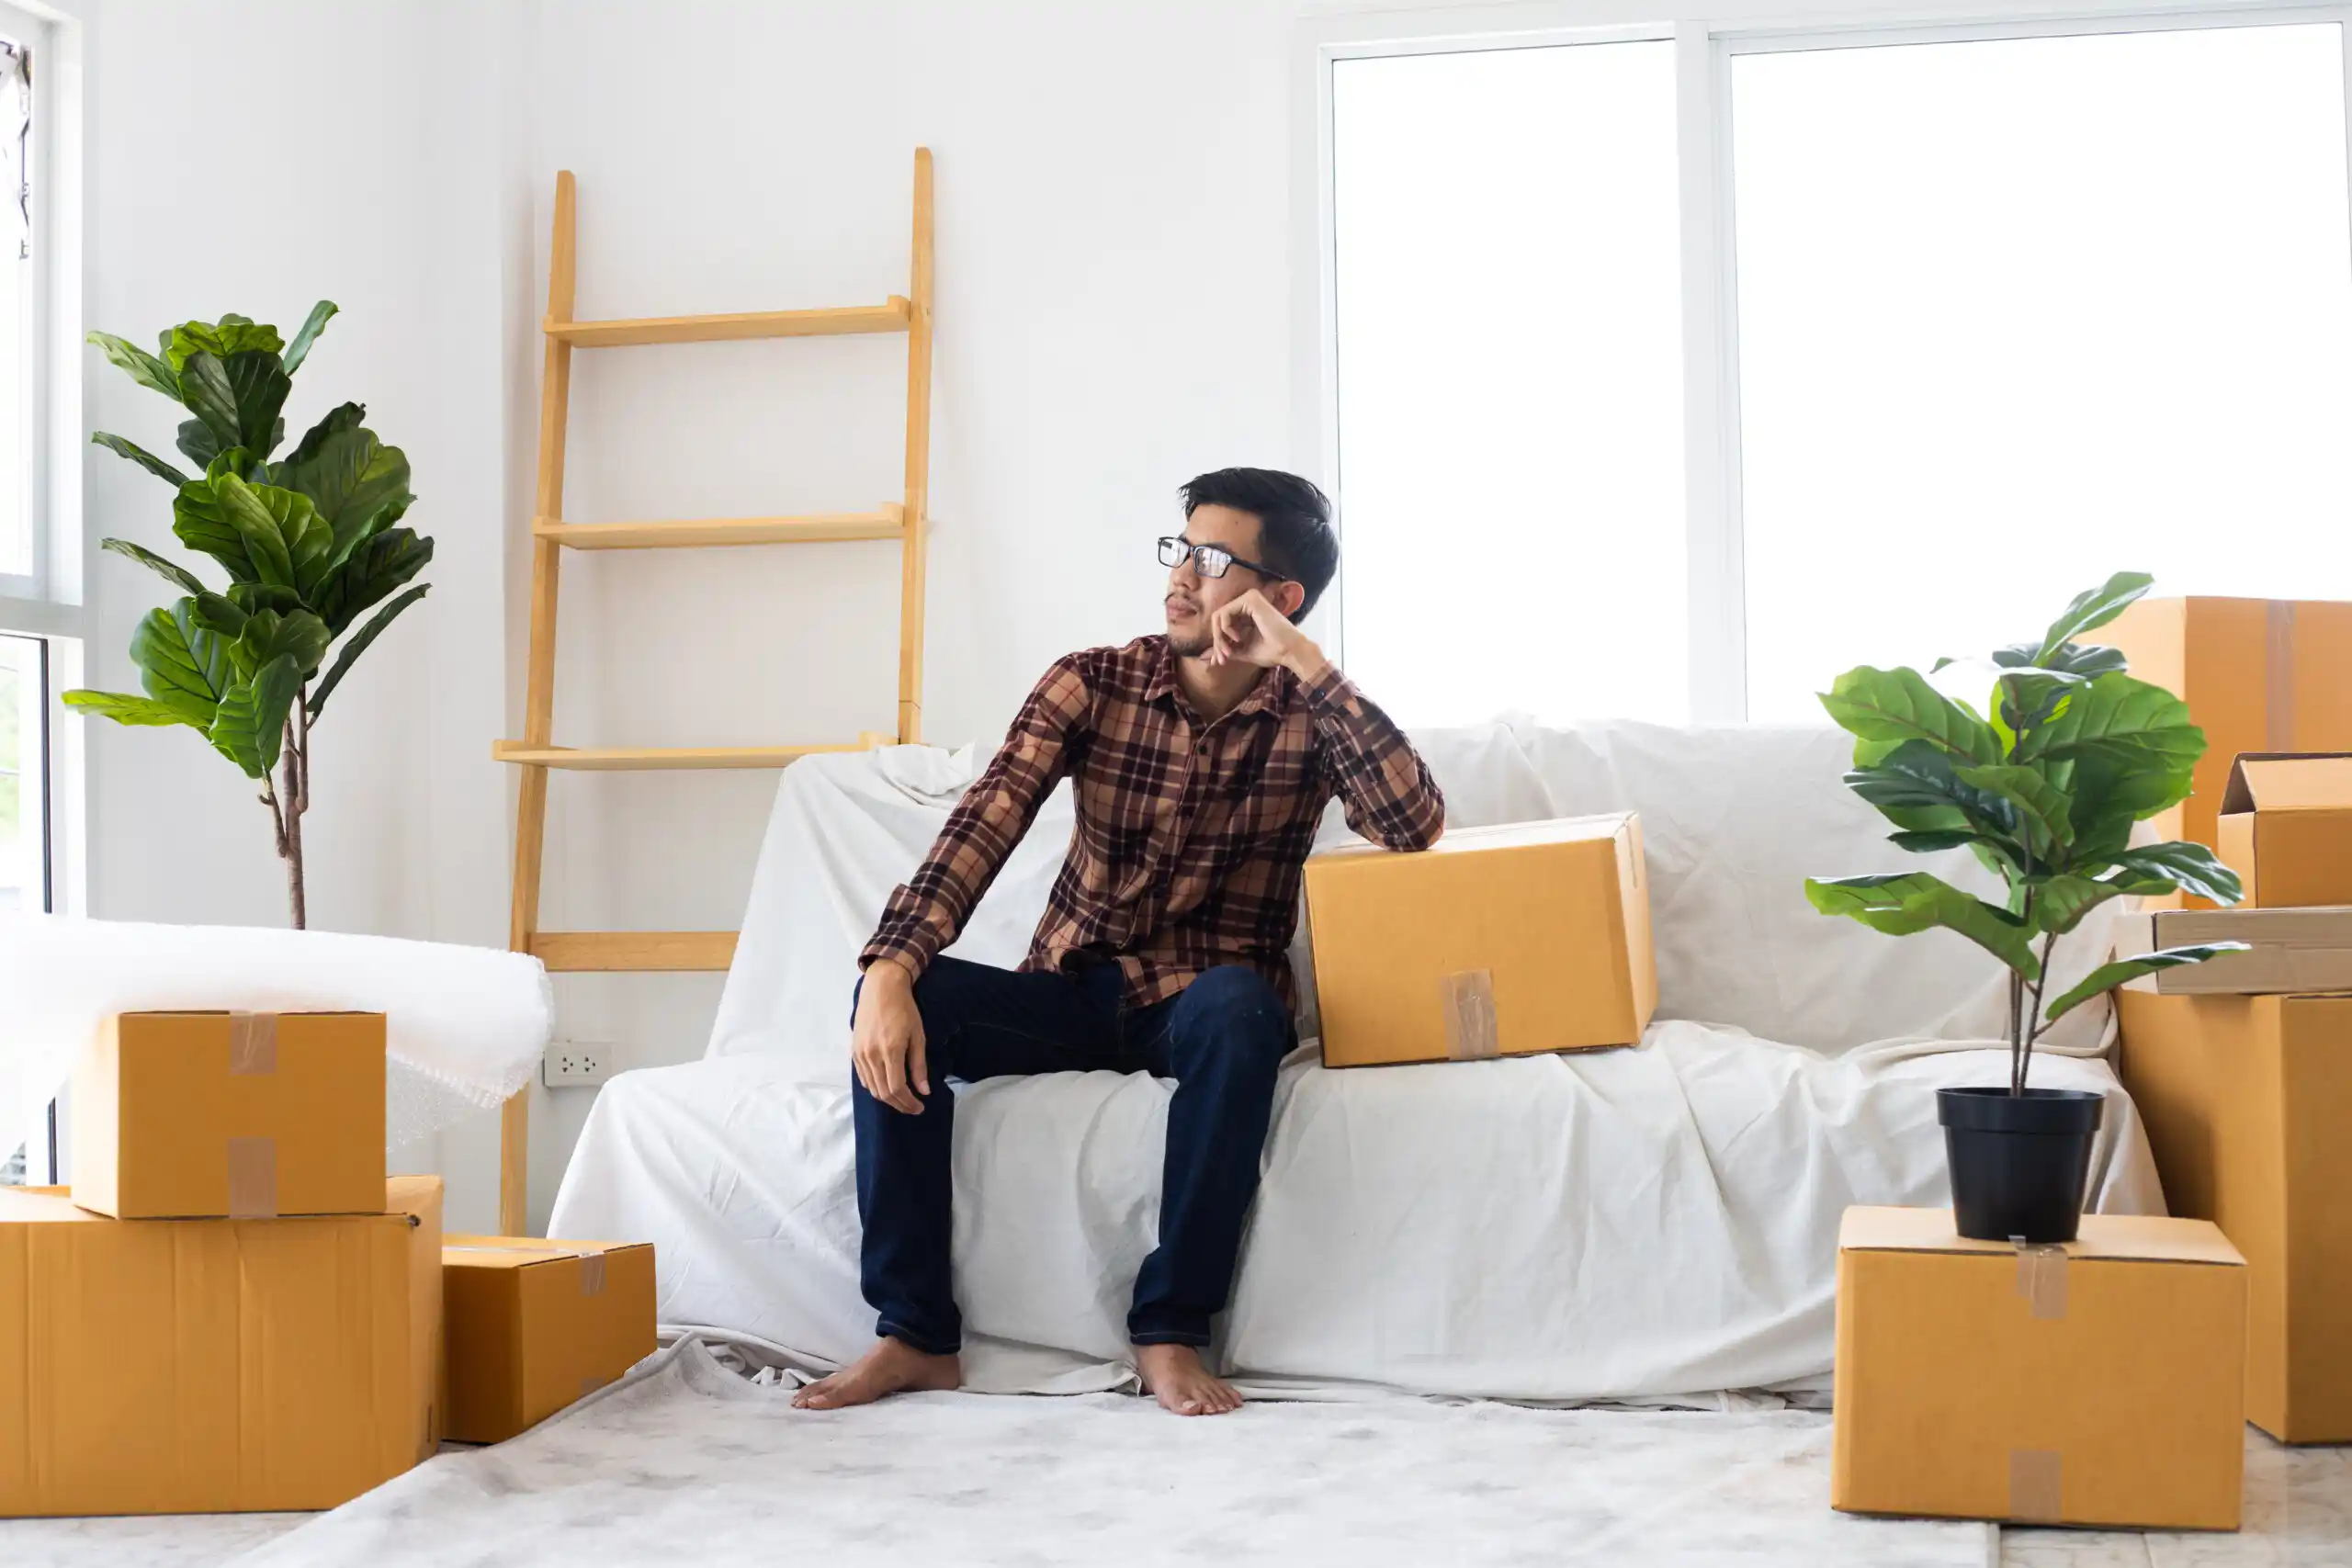 Man Sitting in Room of Moving Boxes